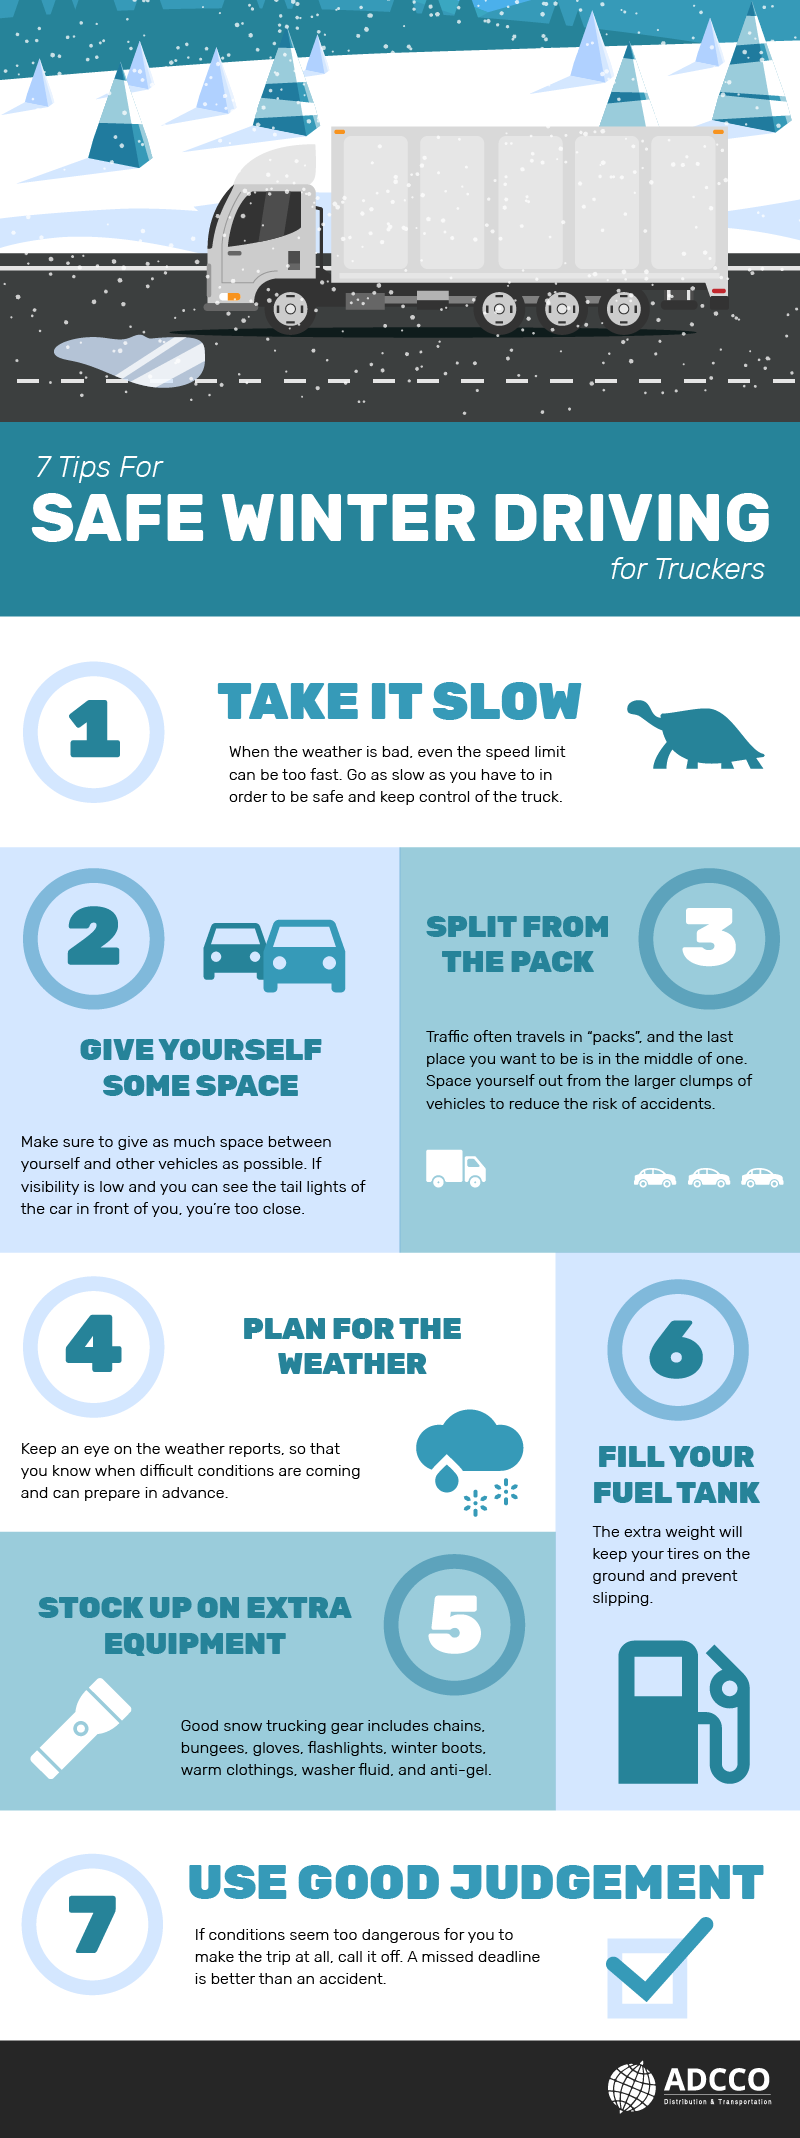 7 Tips for Winter Driving